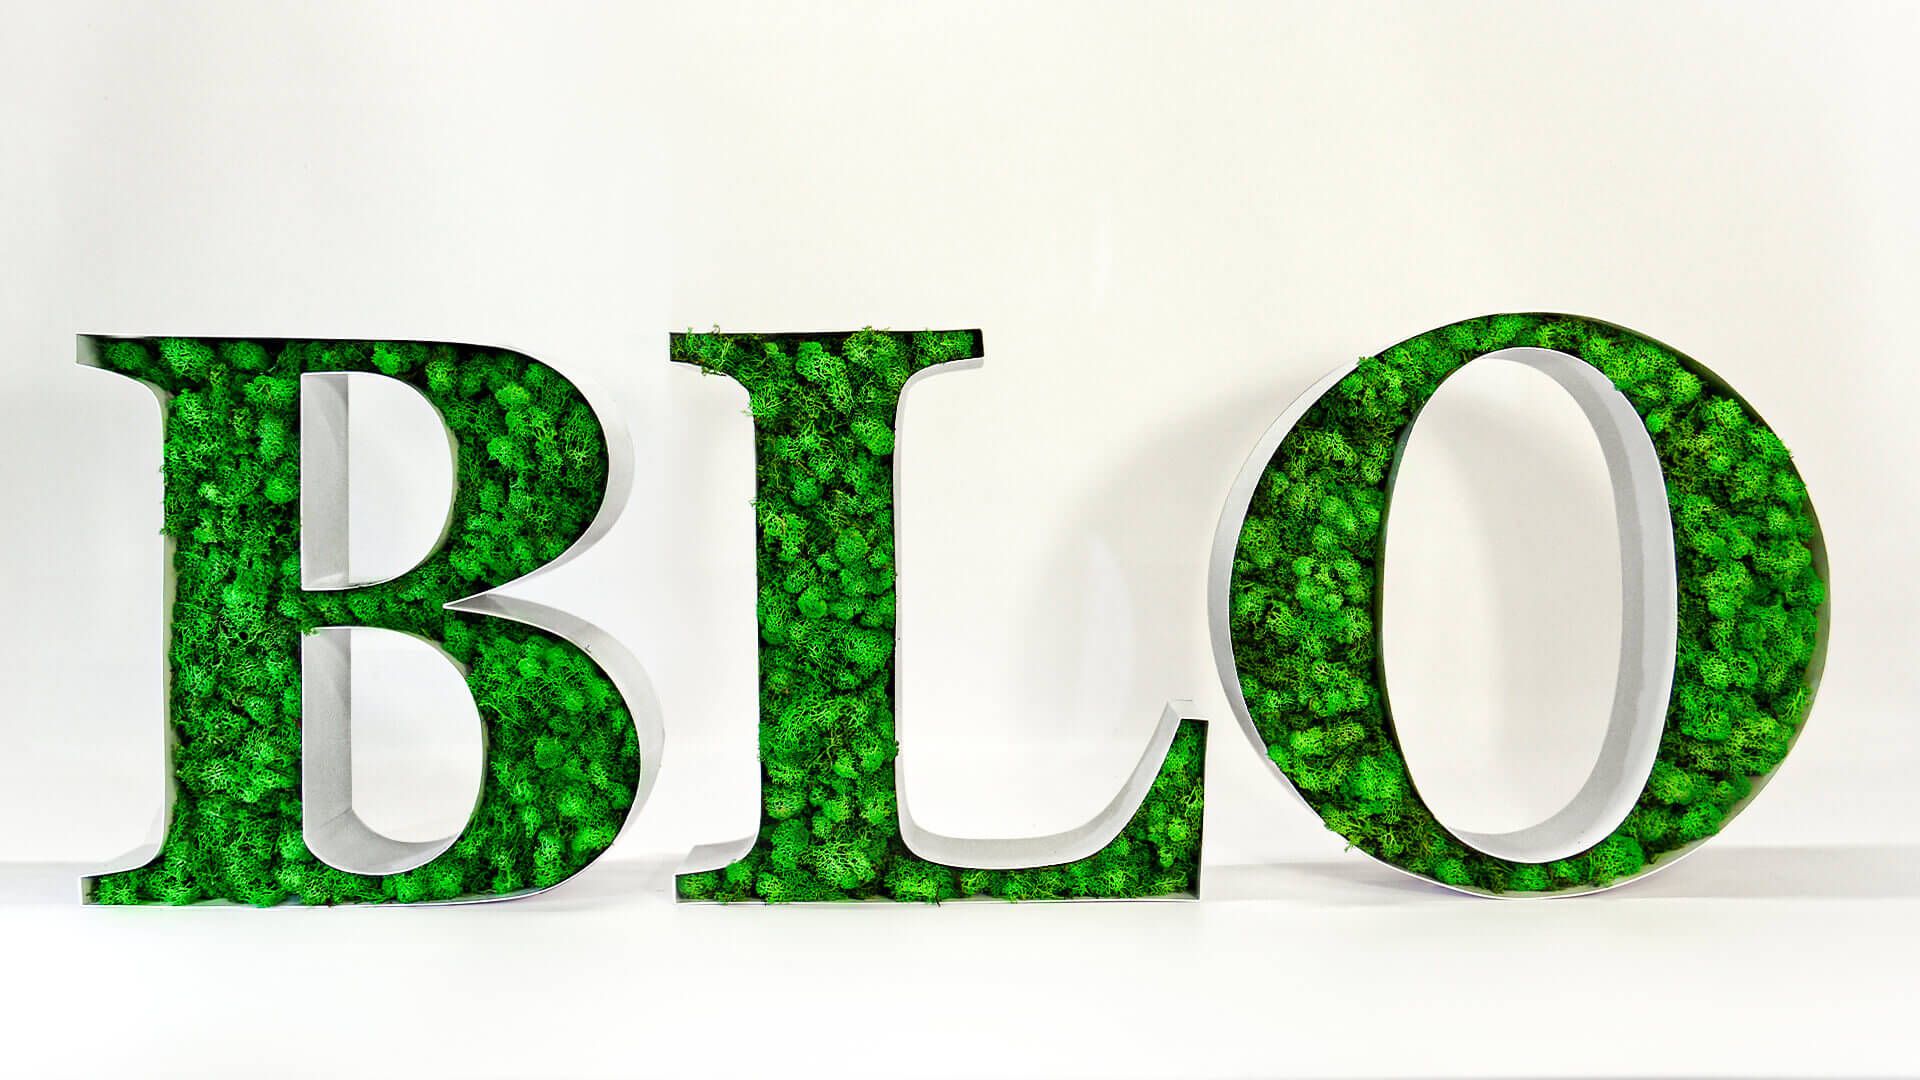 BLO decorative letters - Decorative letters BLO, filled with moss.